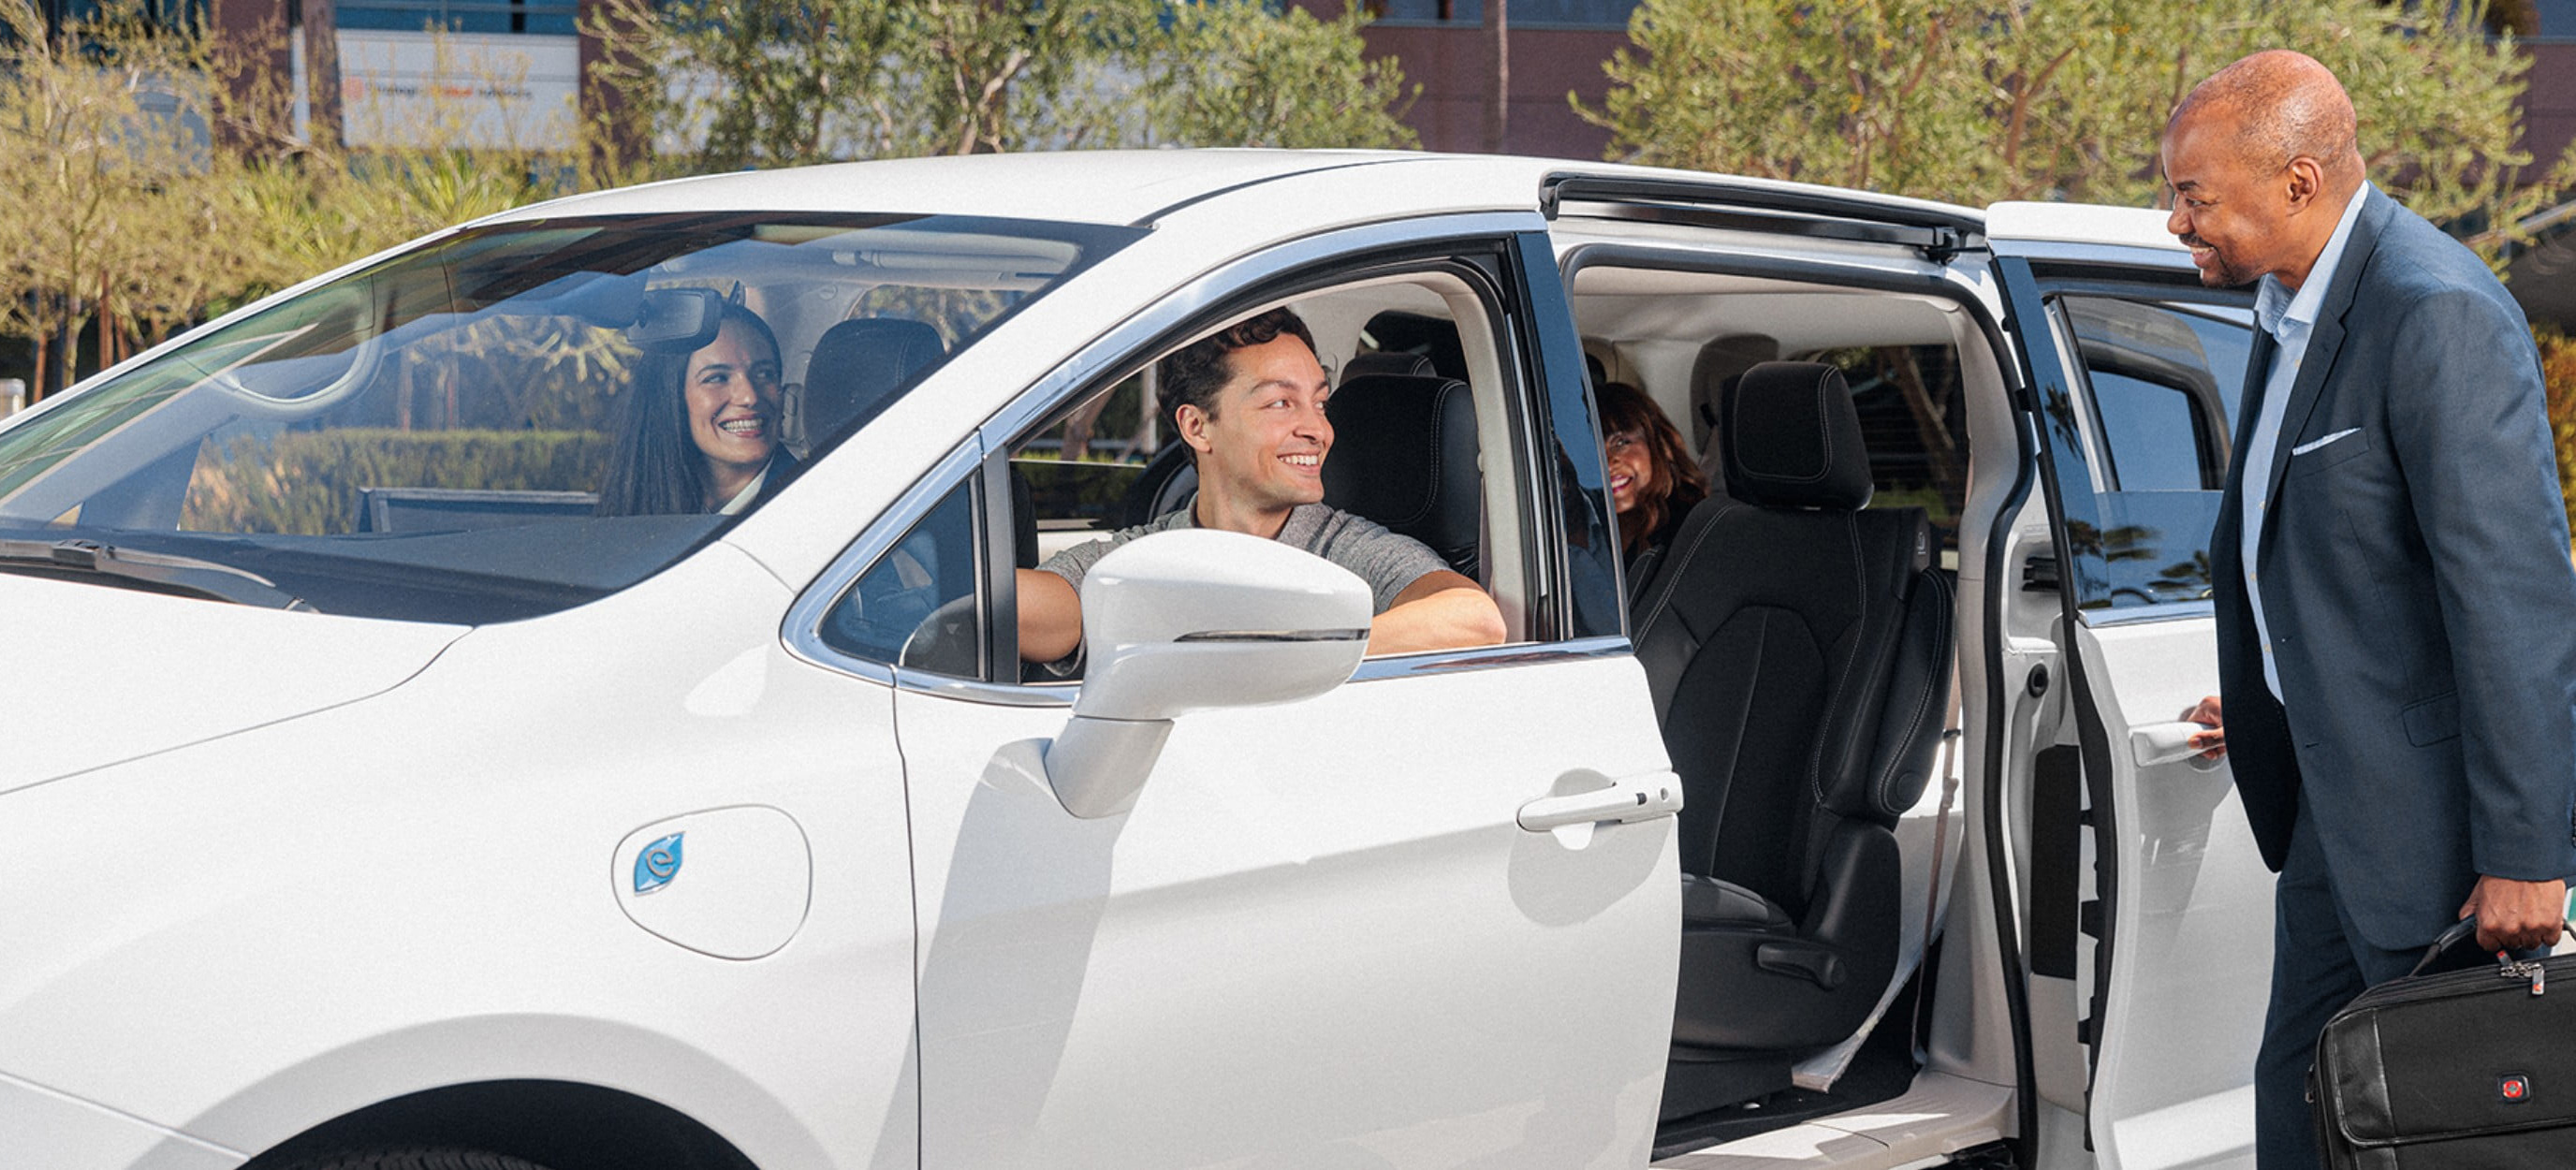 A group of business associates ride in a white van